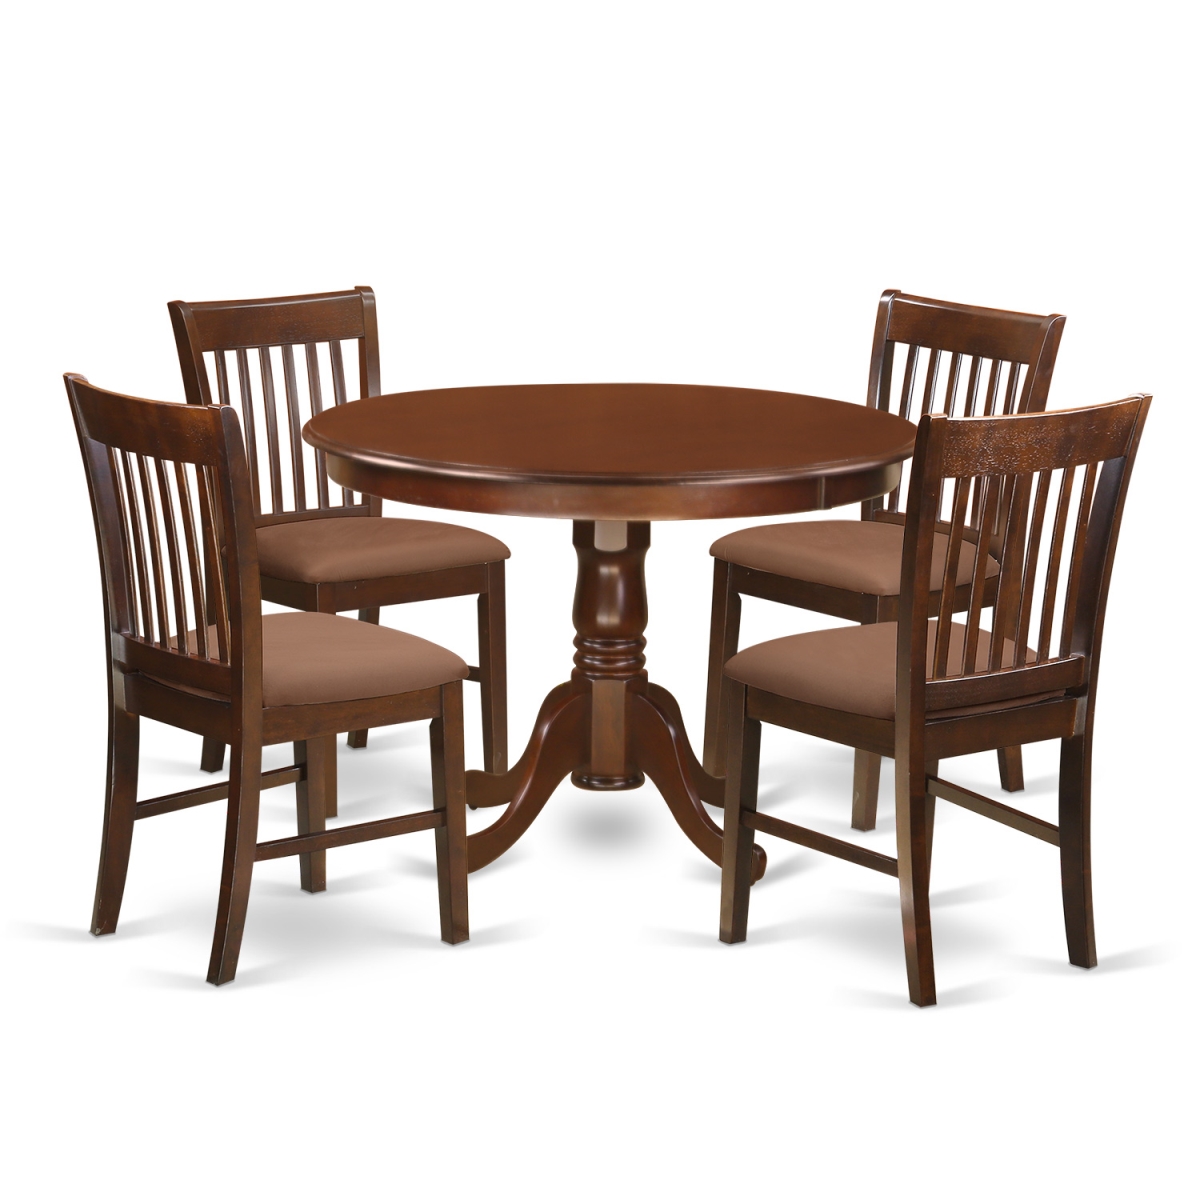 Picture of East West Furniture HLNO5-MAH-C Microfiber Dining Set - One Kitchen Table & 4 Cushion Seat Chairs&#44; Mahogany - 5 Piece